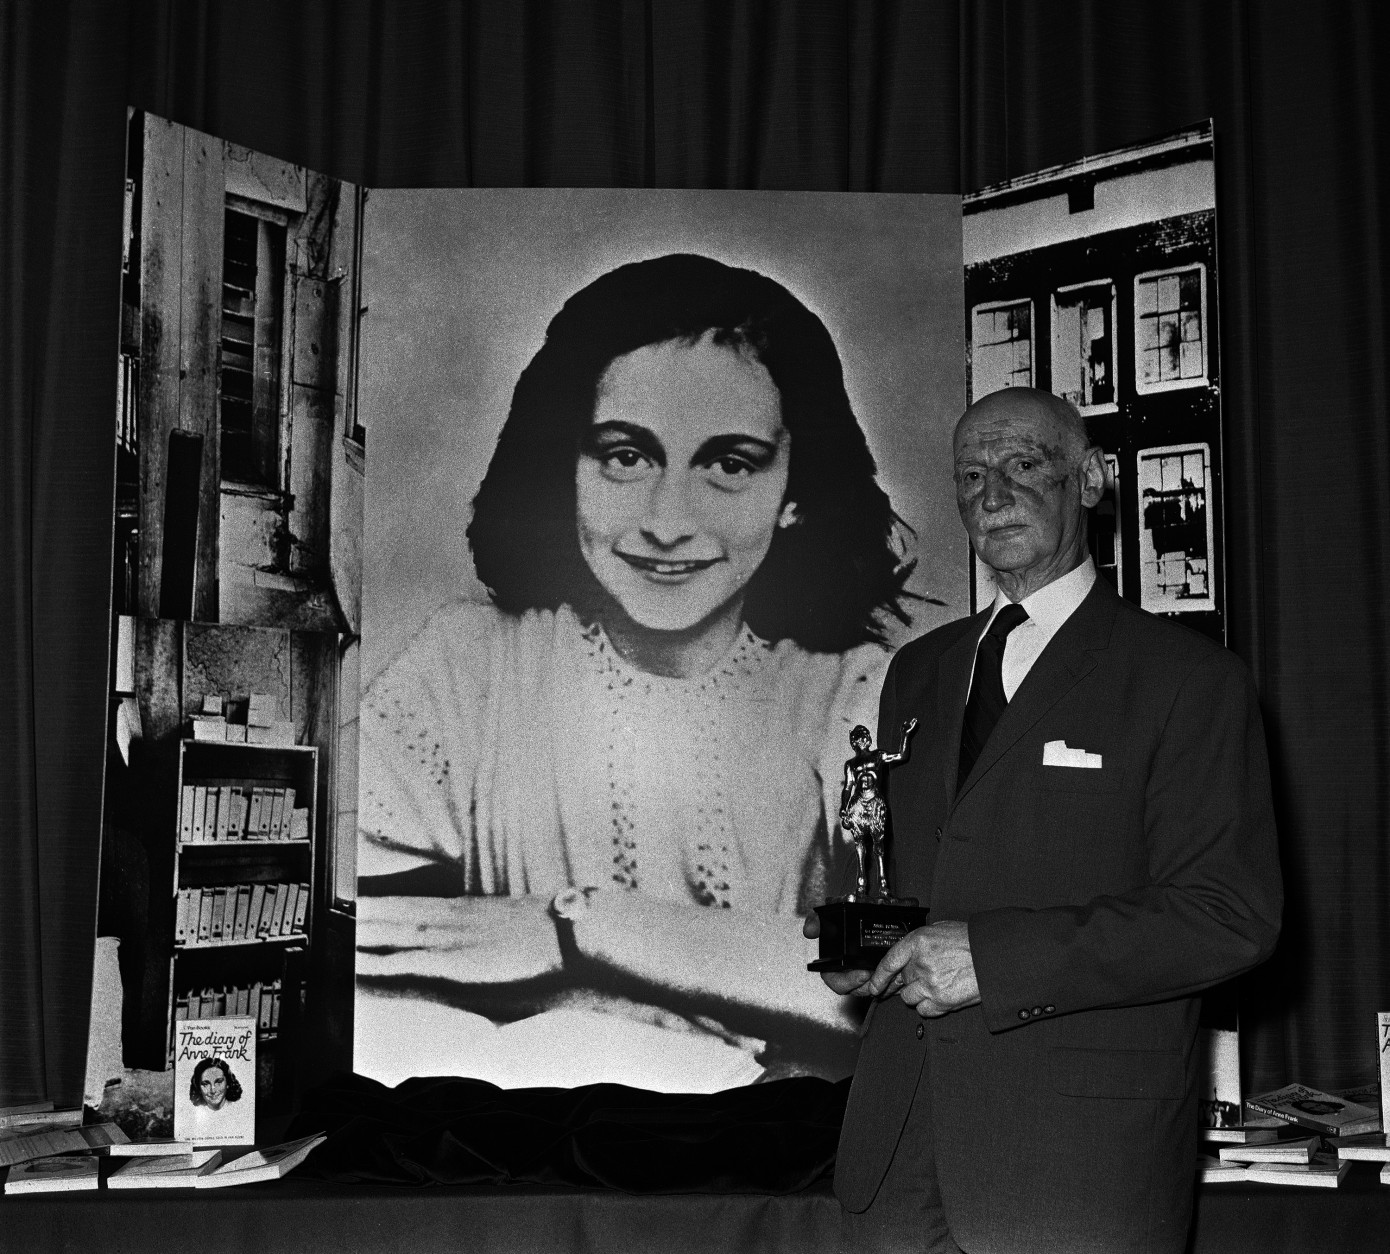 On this date in 1944, 15-year-old diarist Anne Frank was arrested with her sister, parents and four others by the Gestapo after hiding for two years inside a building in Amsterdam. Here, Dr. Otto Frank holds the Golden Pan award, given for the sale of one million copies of the famous paperback, "The Diary of Anne Frank." (AP Photo/Dave Caulkin)